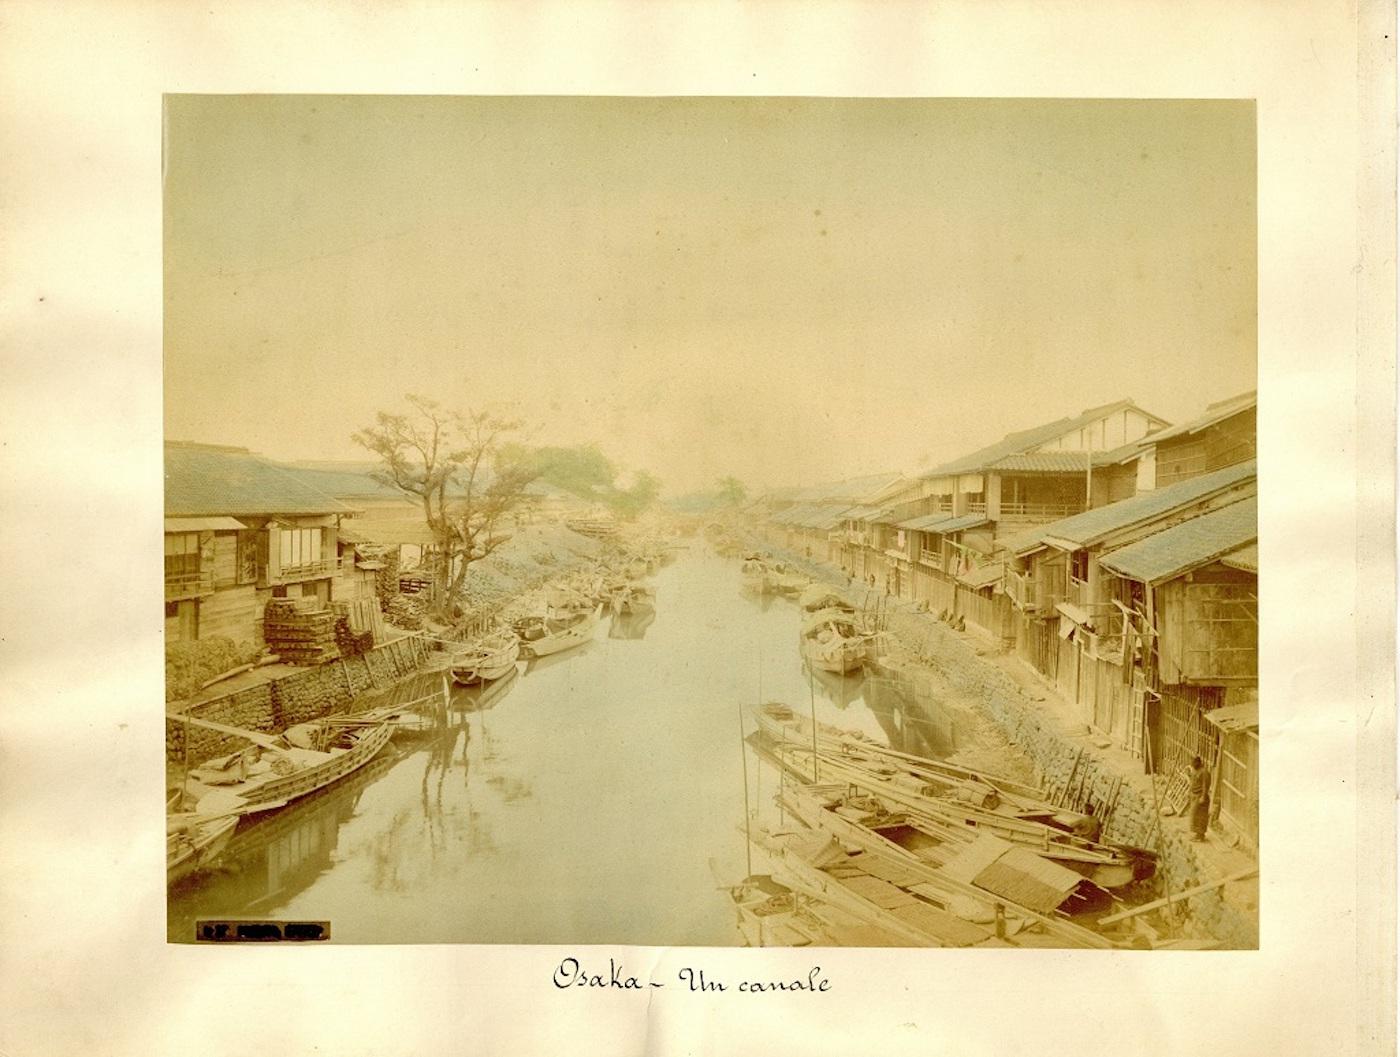 Unknown Black and White Photograph - Waterway in Osaka - Hand-Colored Albumen Print 1870/1890